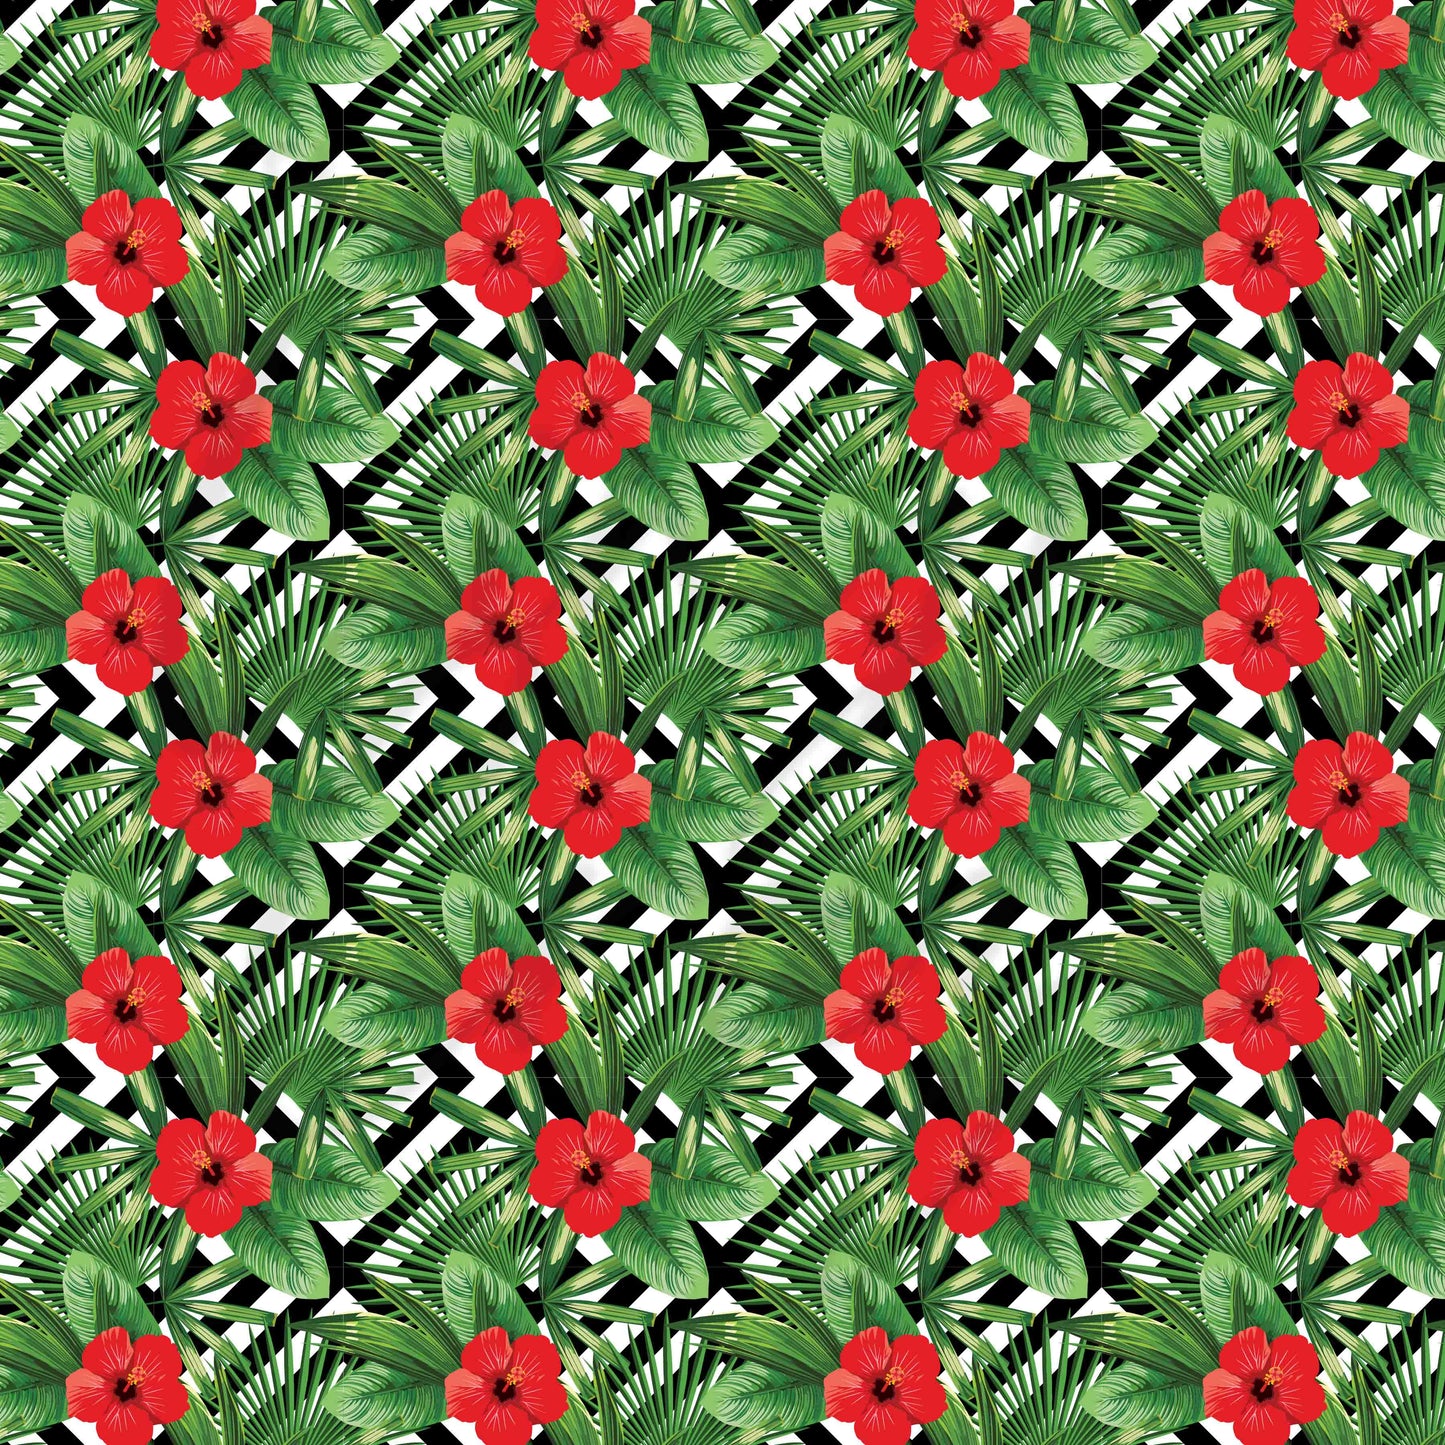 Red Patterned Hibiscus Adhesive Vinyl